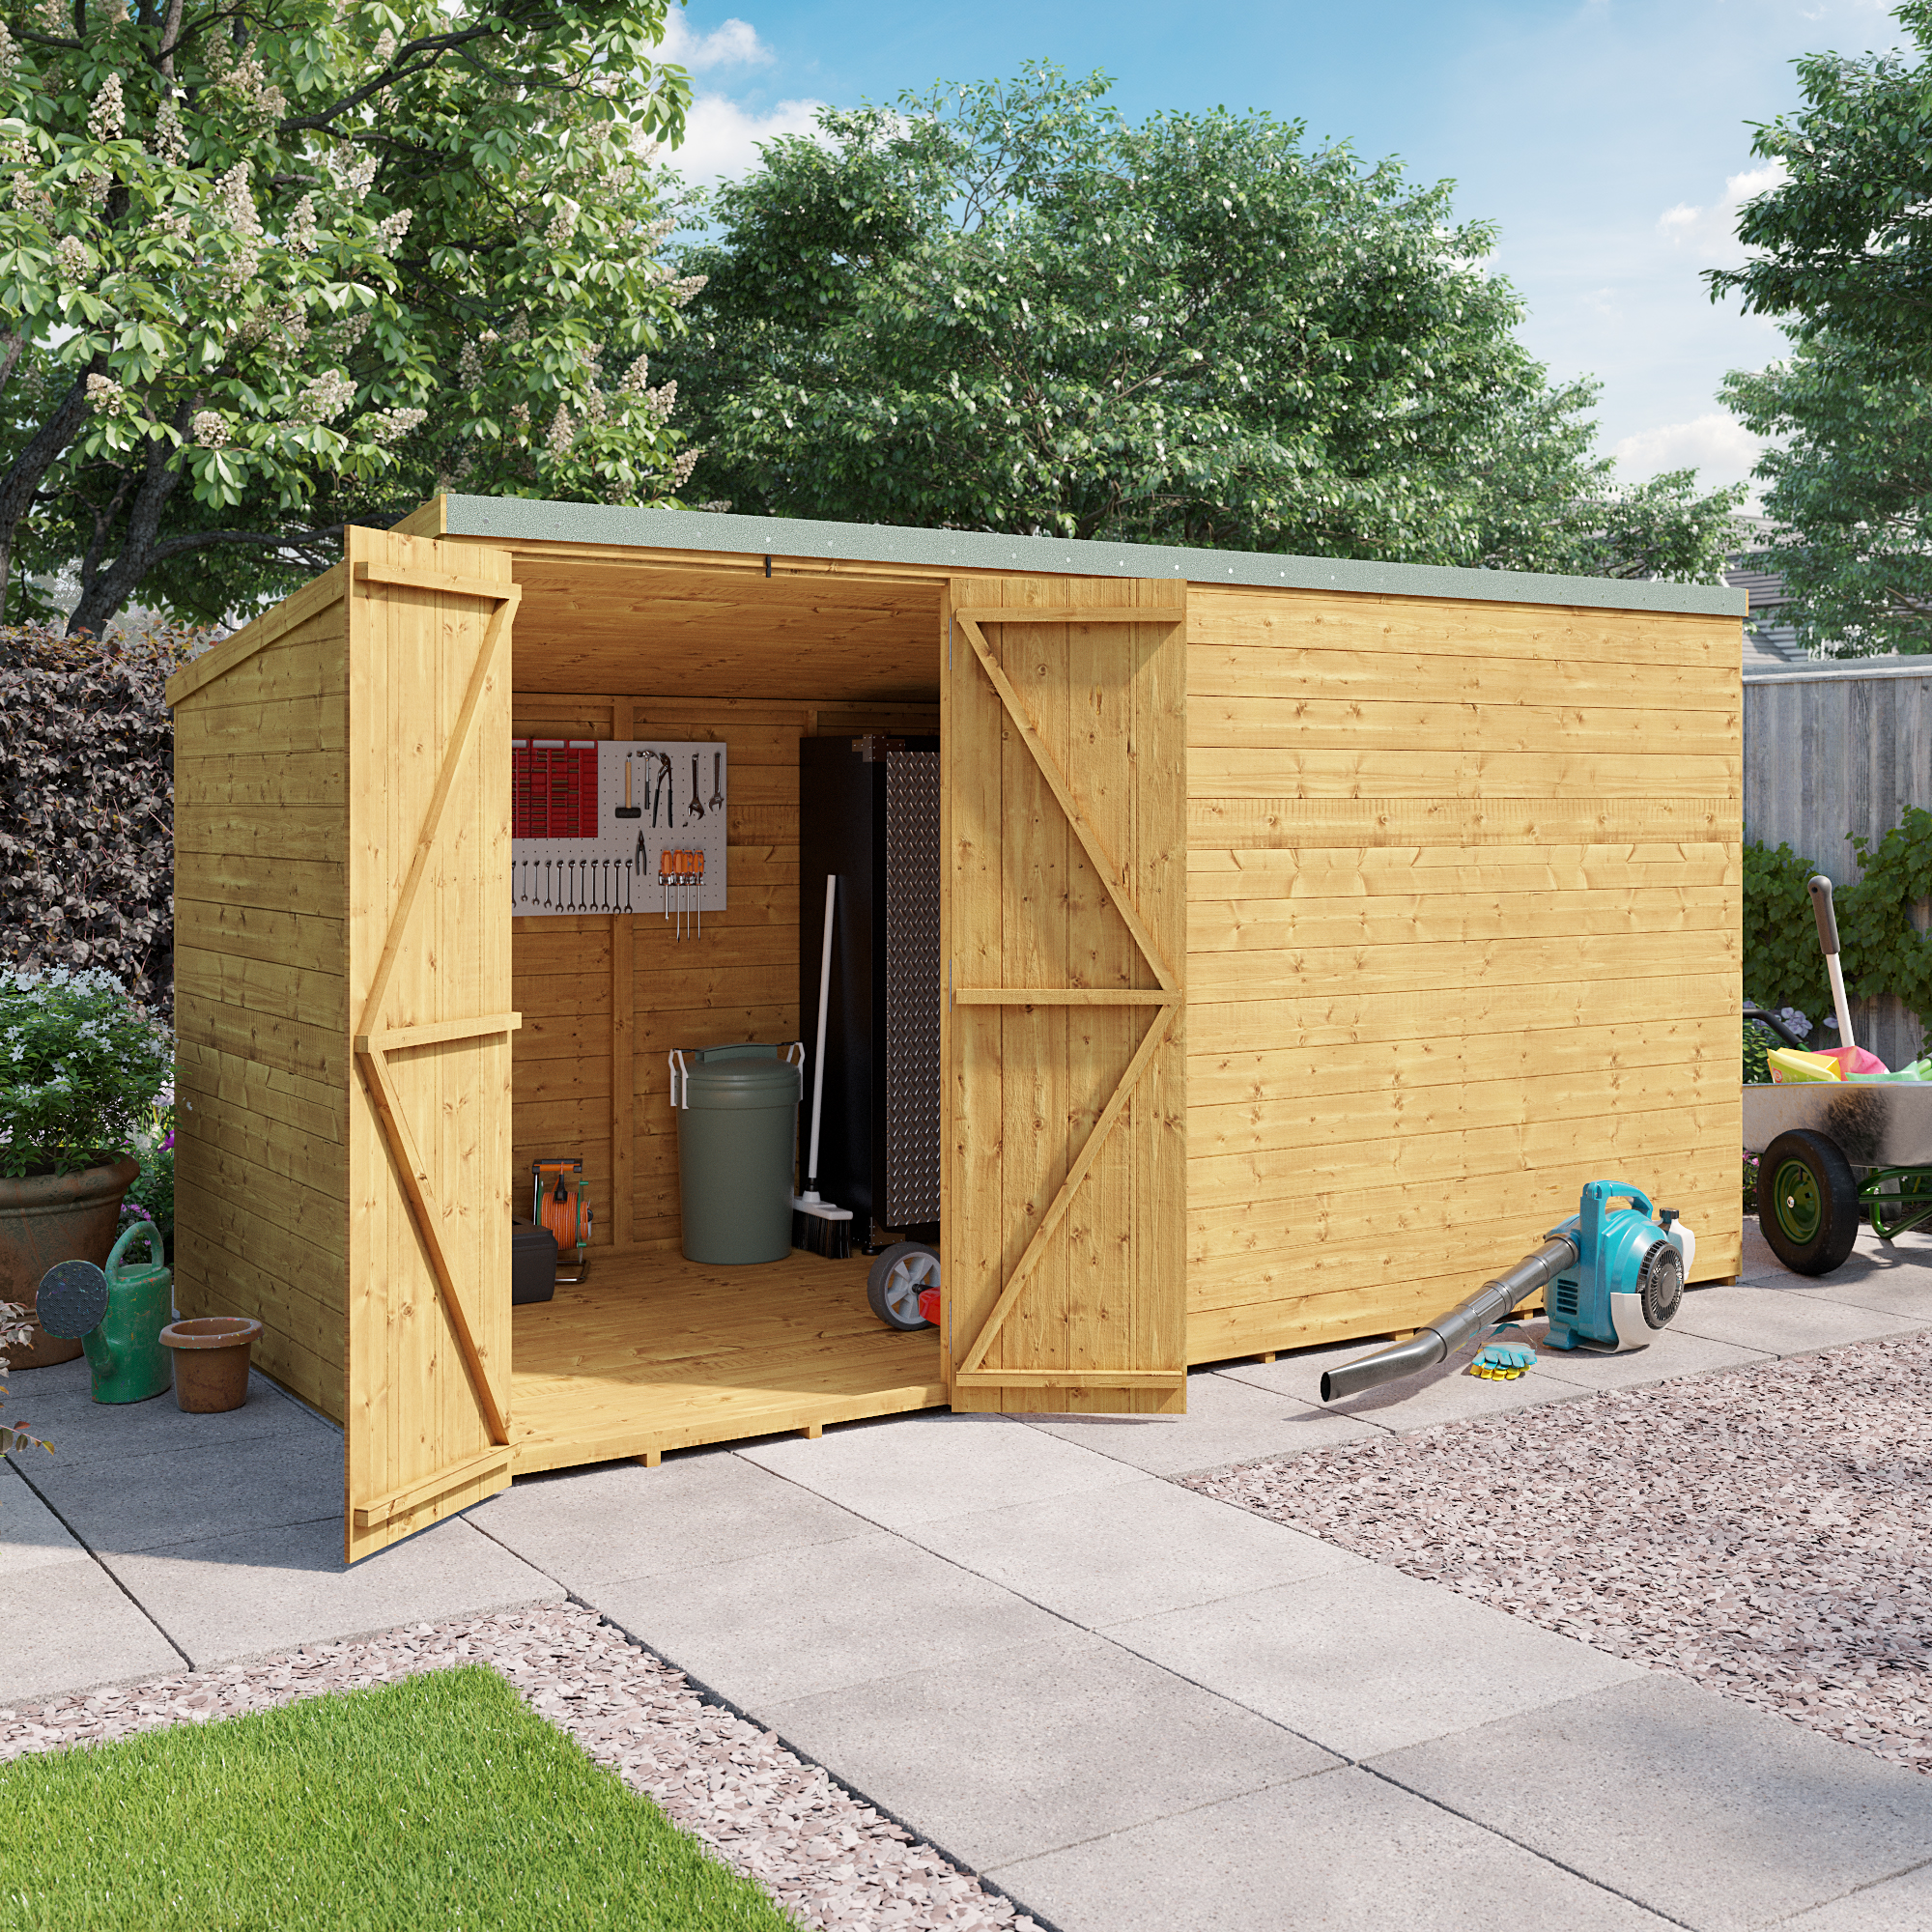 Image of 12 x 6 Shed - BillyOh Master Tongue and Groove Pent Shed - Windowless 12x6 Wooden Garden Shed